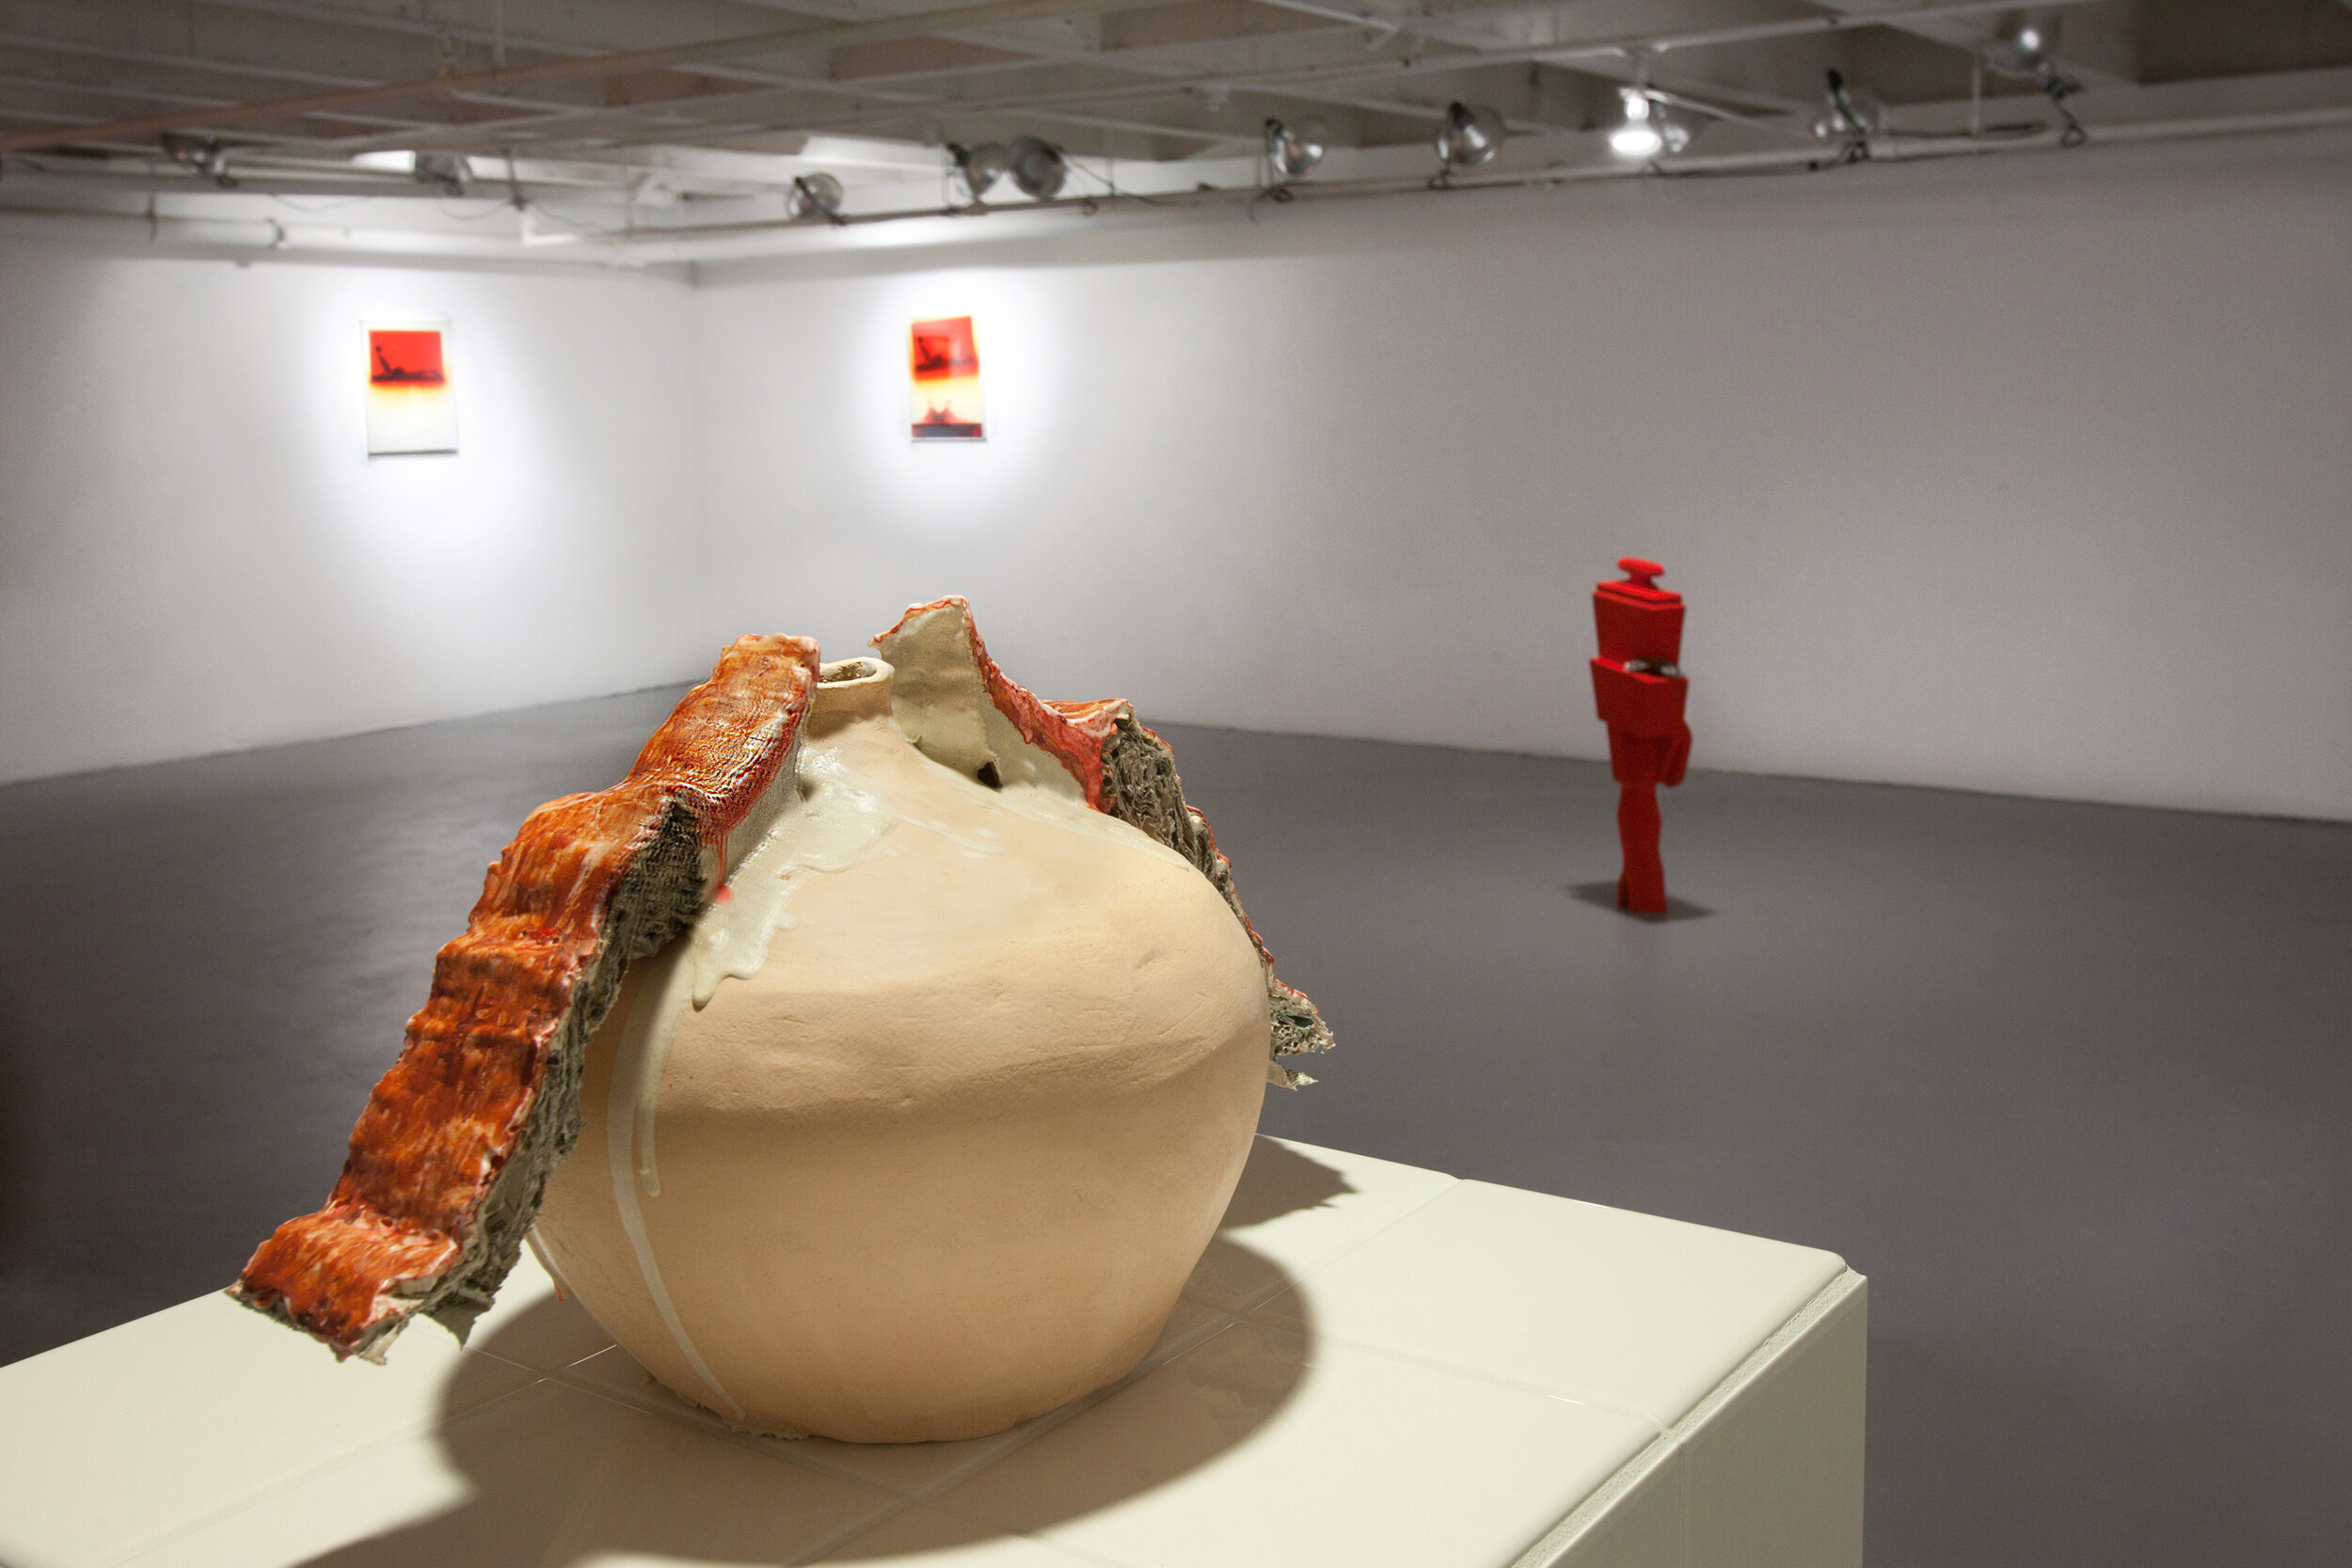   Reds , In installation at CJG, March 2014 